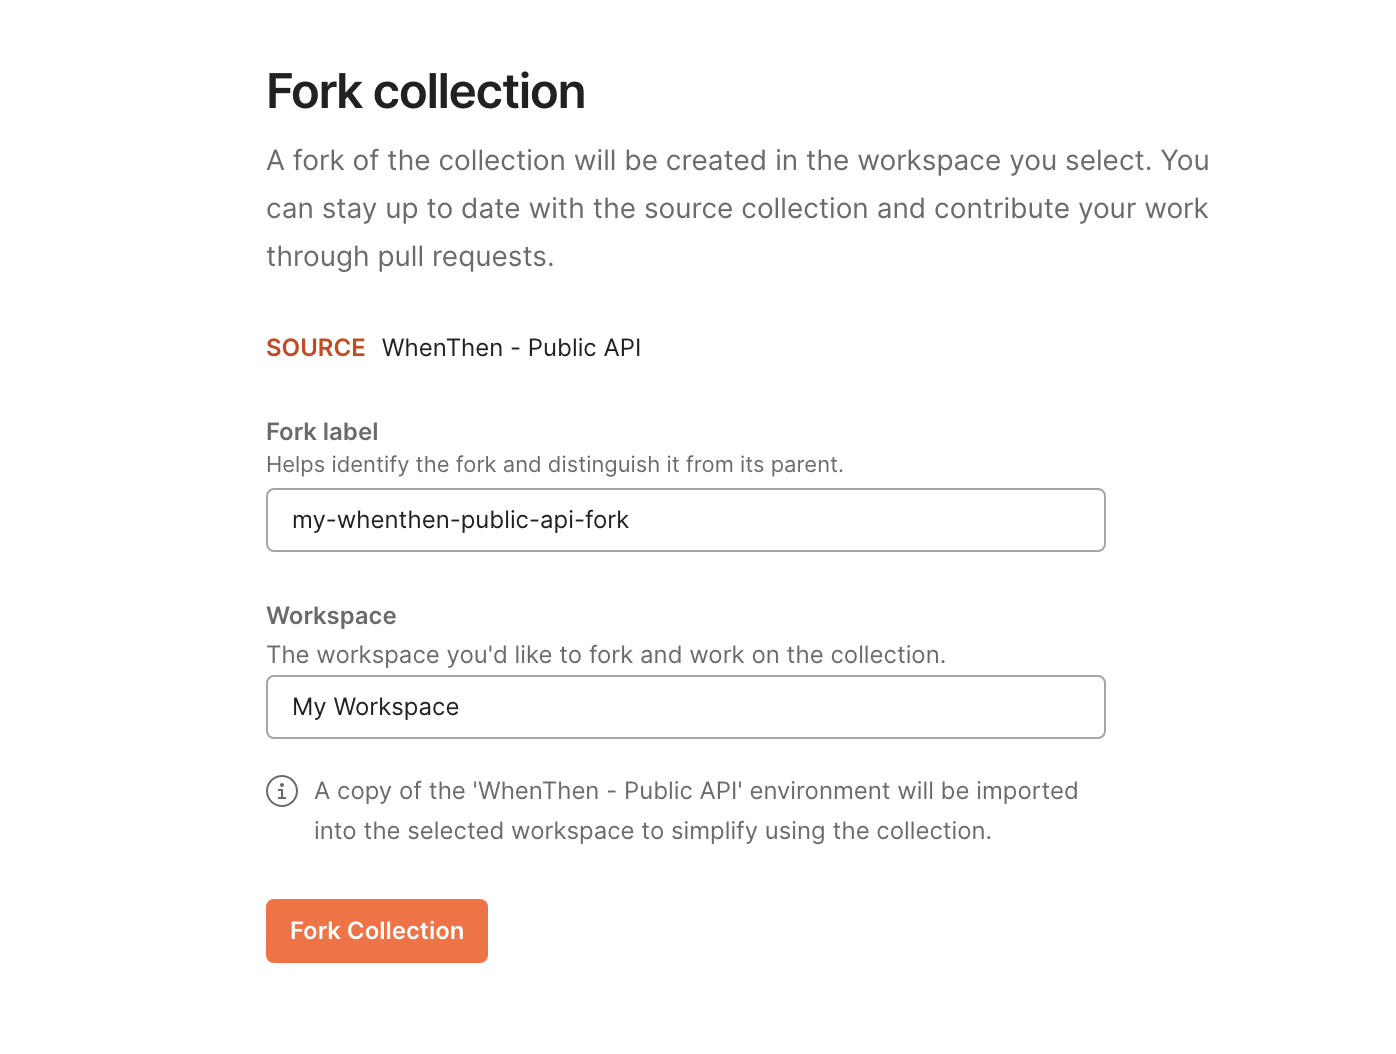 fork collection instruction